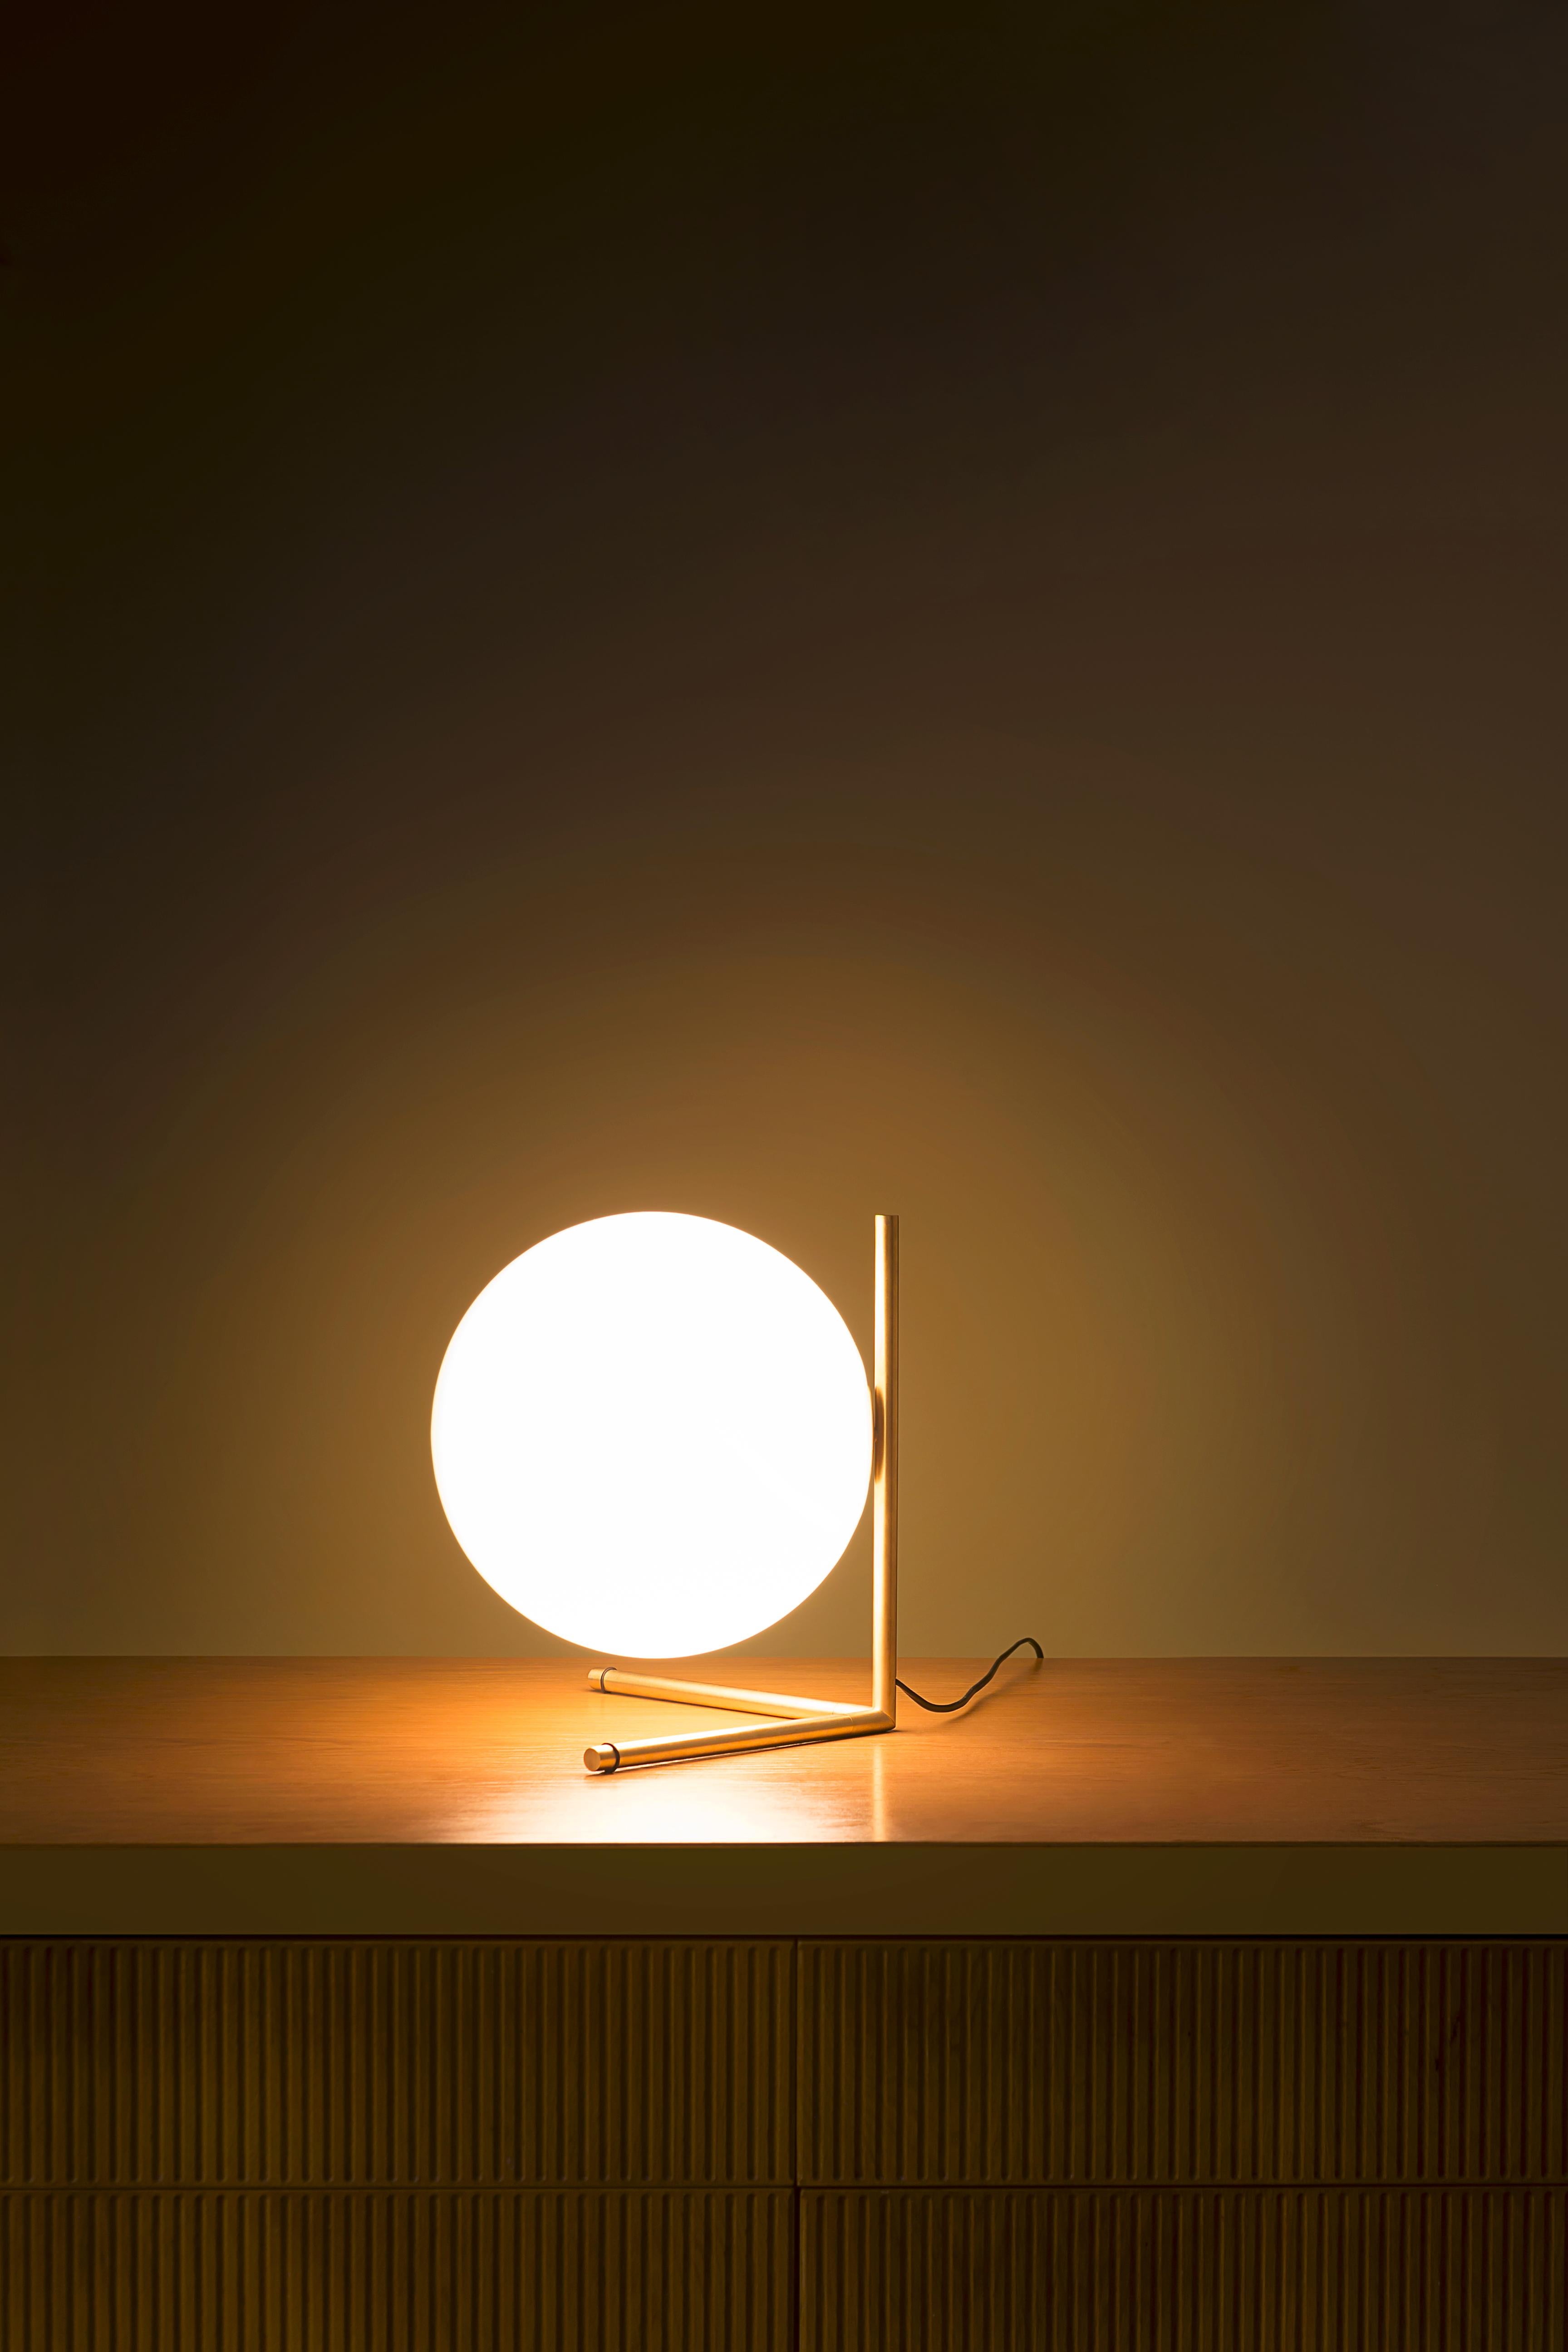 FLOS IC Lights T2 Table Lamp in Brass by Michael Anastassiades

Like the other pieces in his IC Light Series, the IC Lights T balances designer Michael Anastassiades’ love of industrial simplicity with intricate symbolism. It provides diffused light